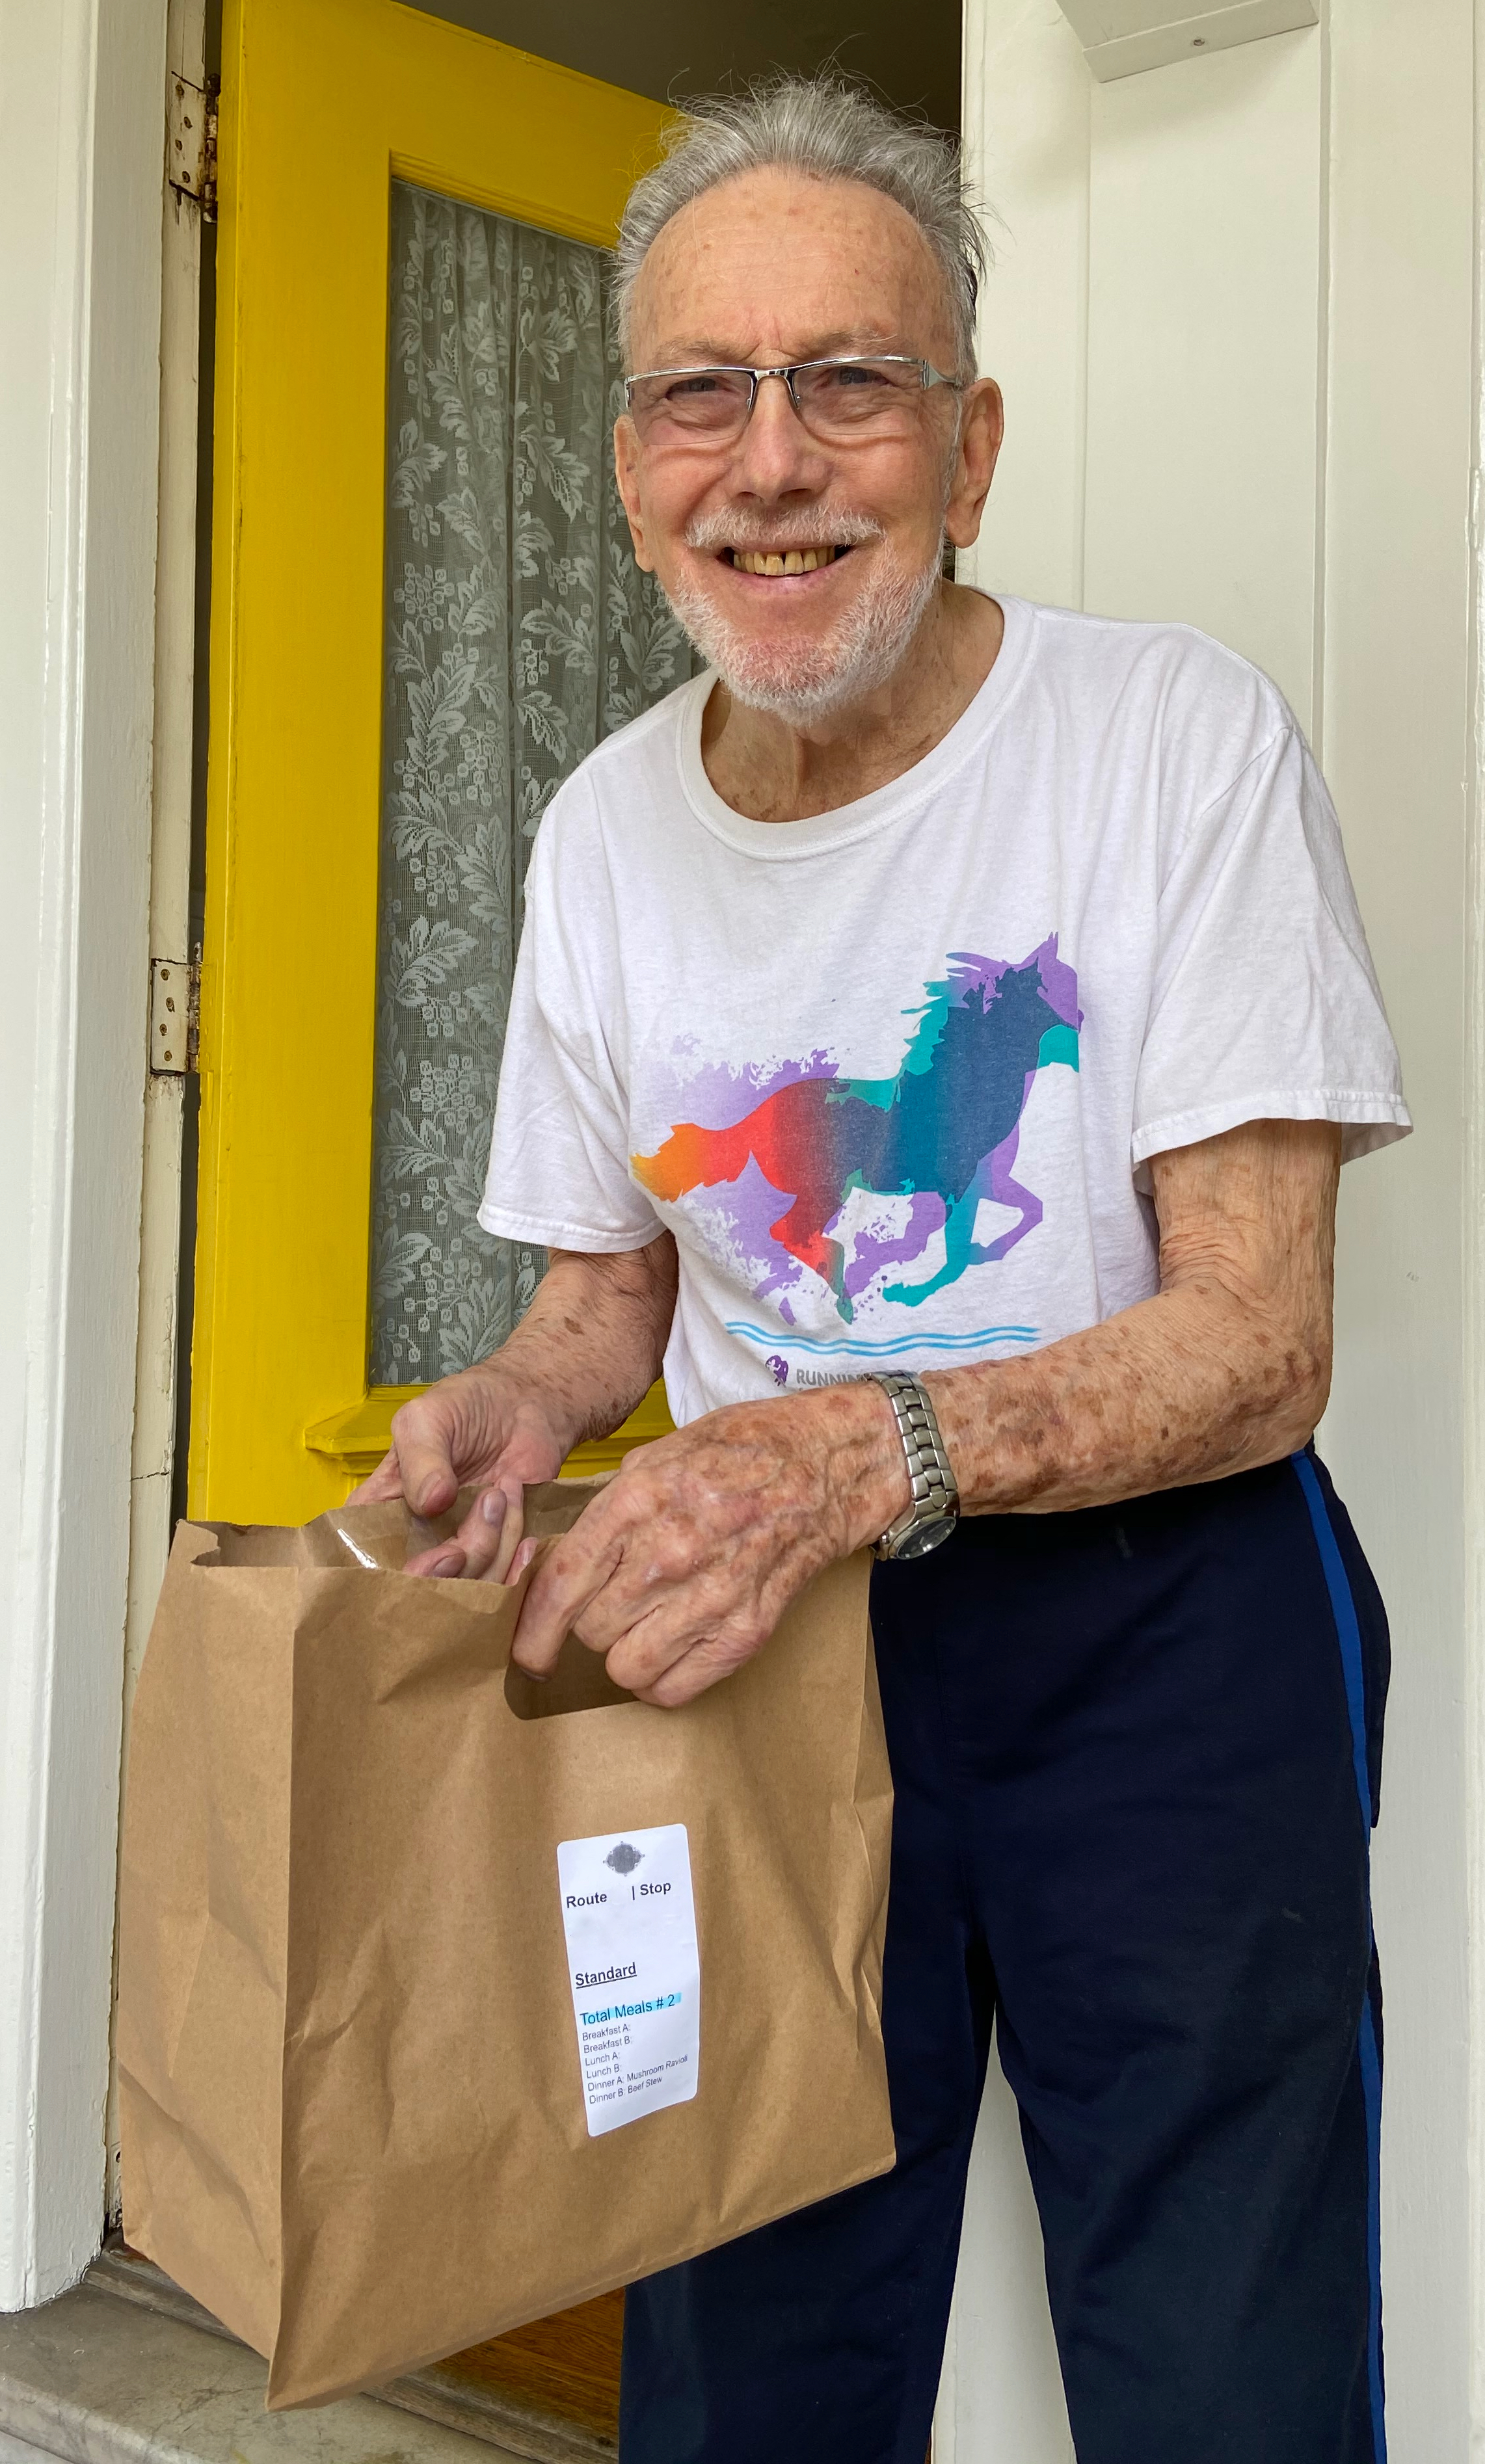 San Francisco Castro resident Tom with his delivery from Great Plates Delivered SF program